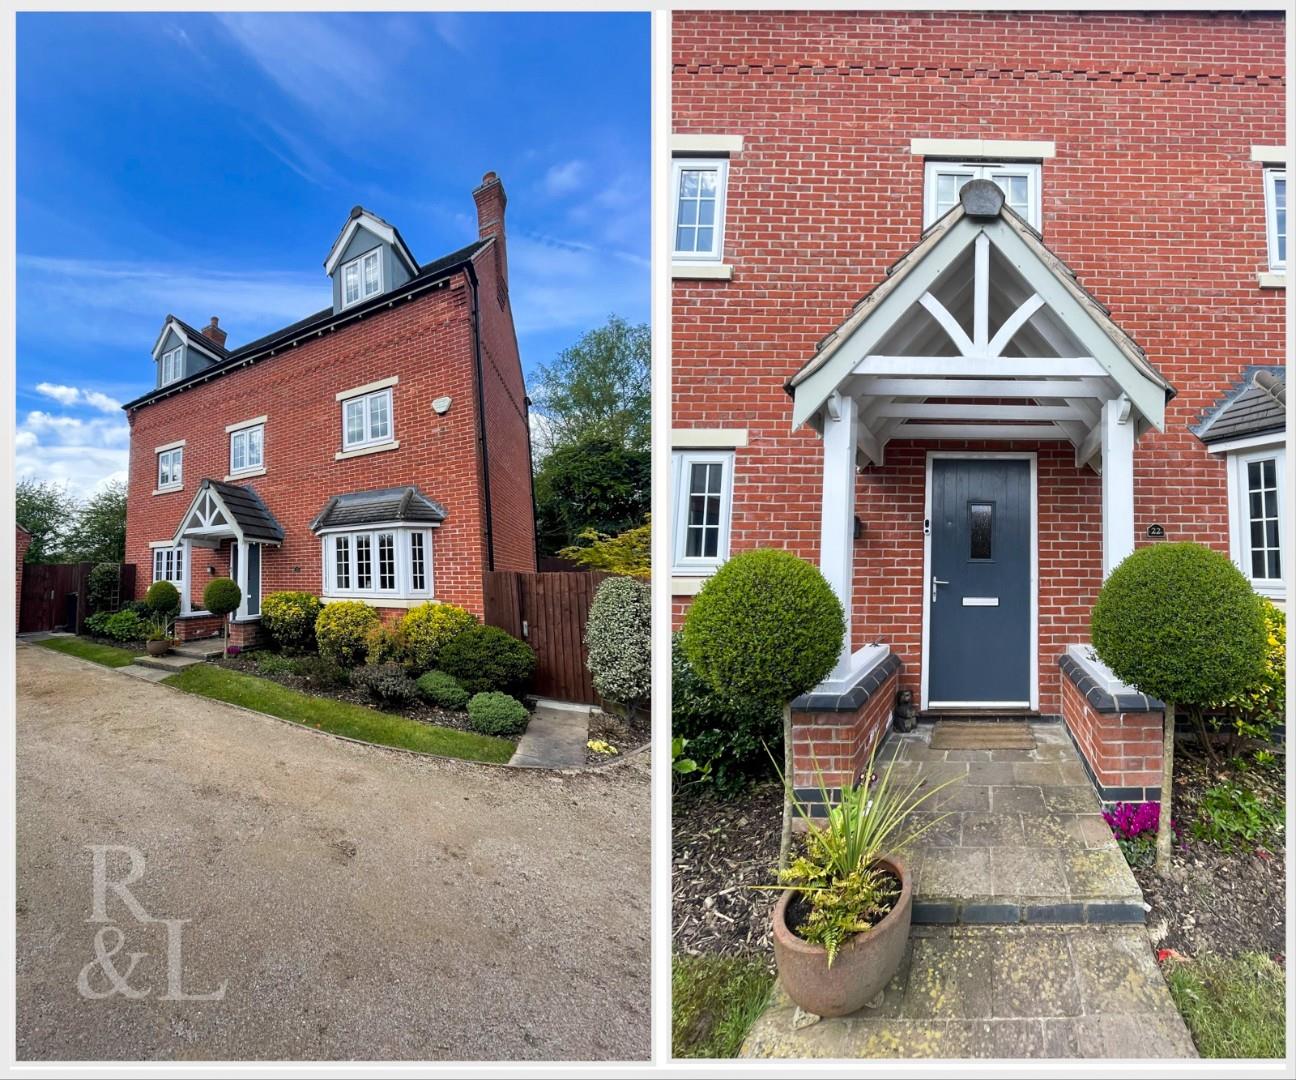 Property image for Pottery Lane, Lount